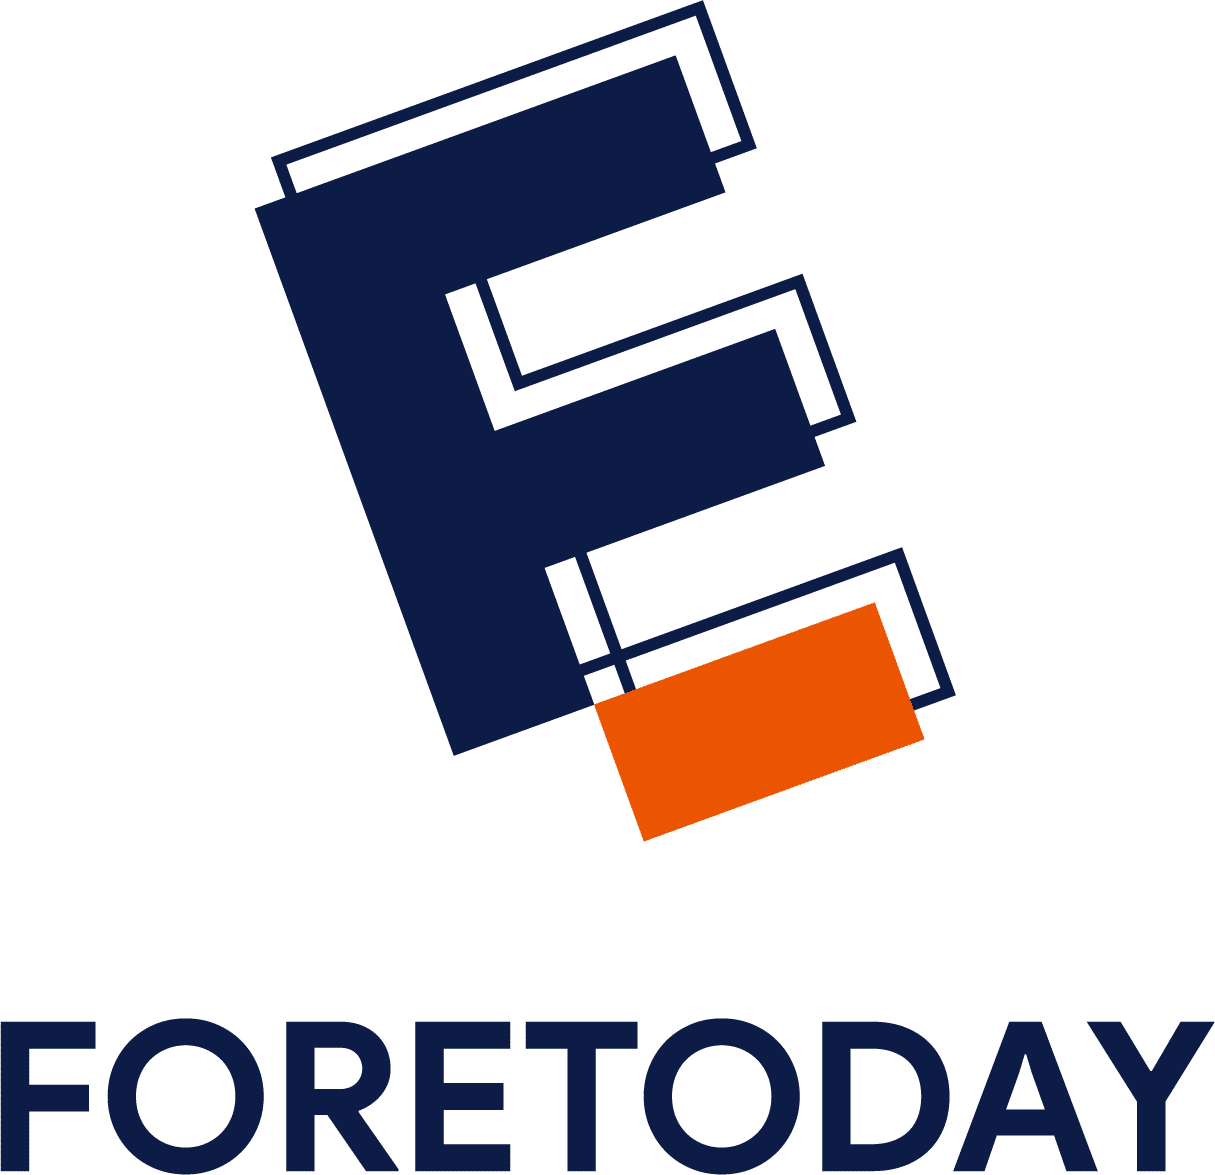 foretoday logo text nder